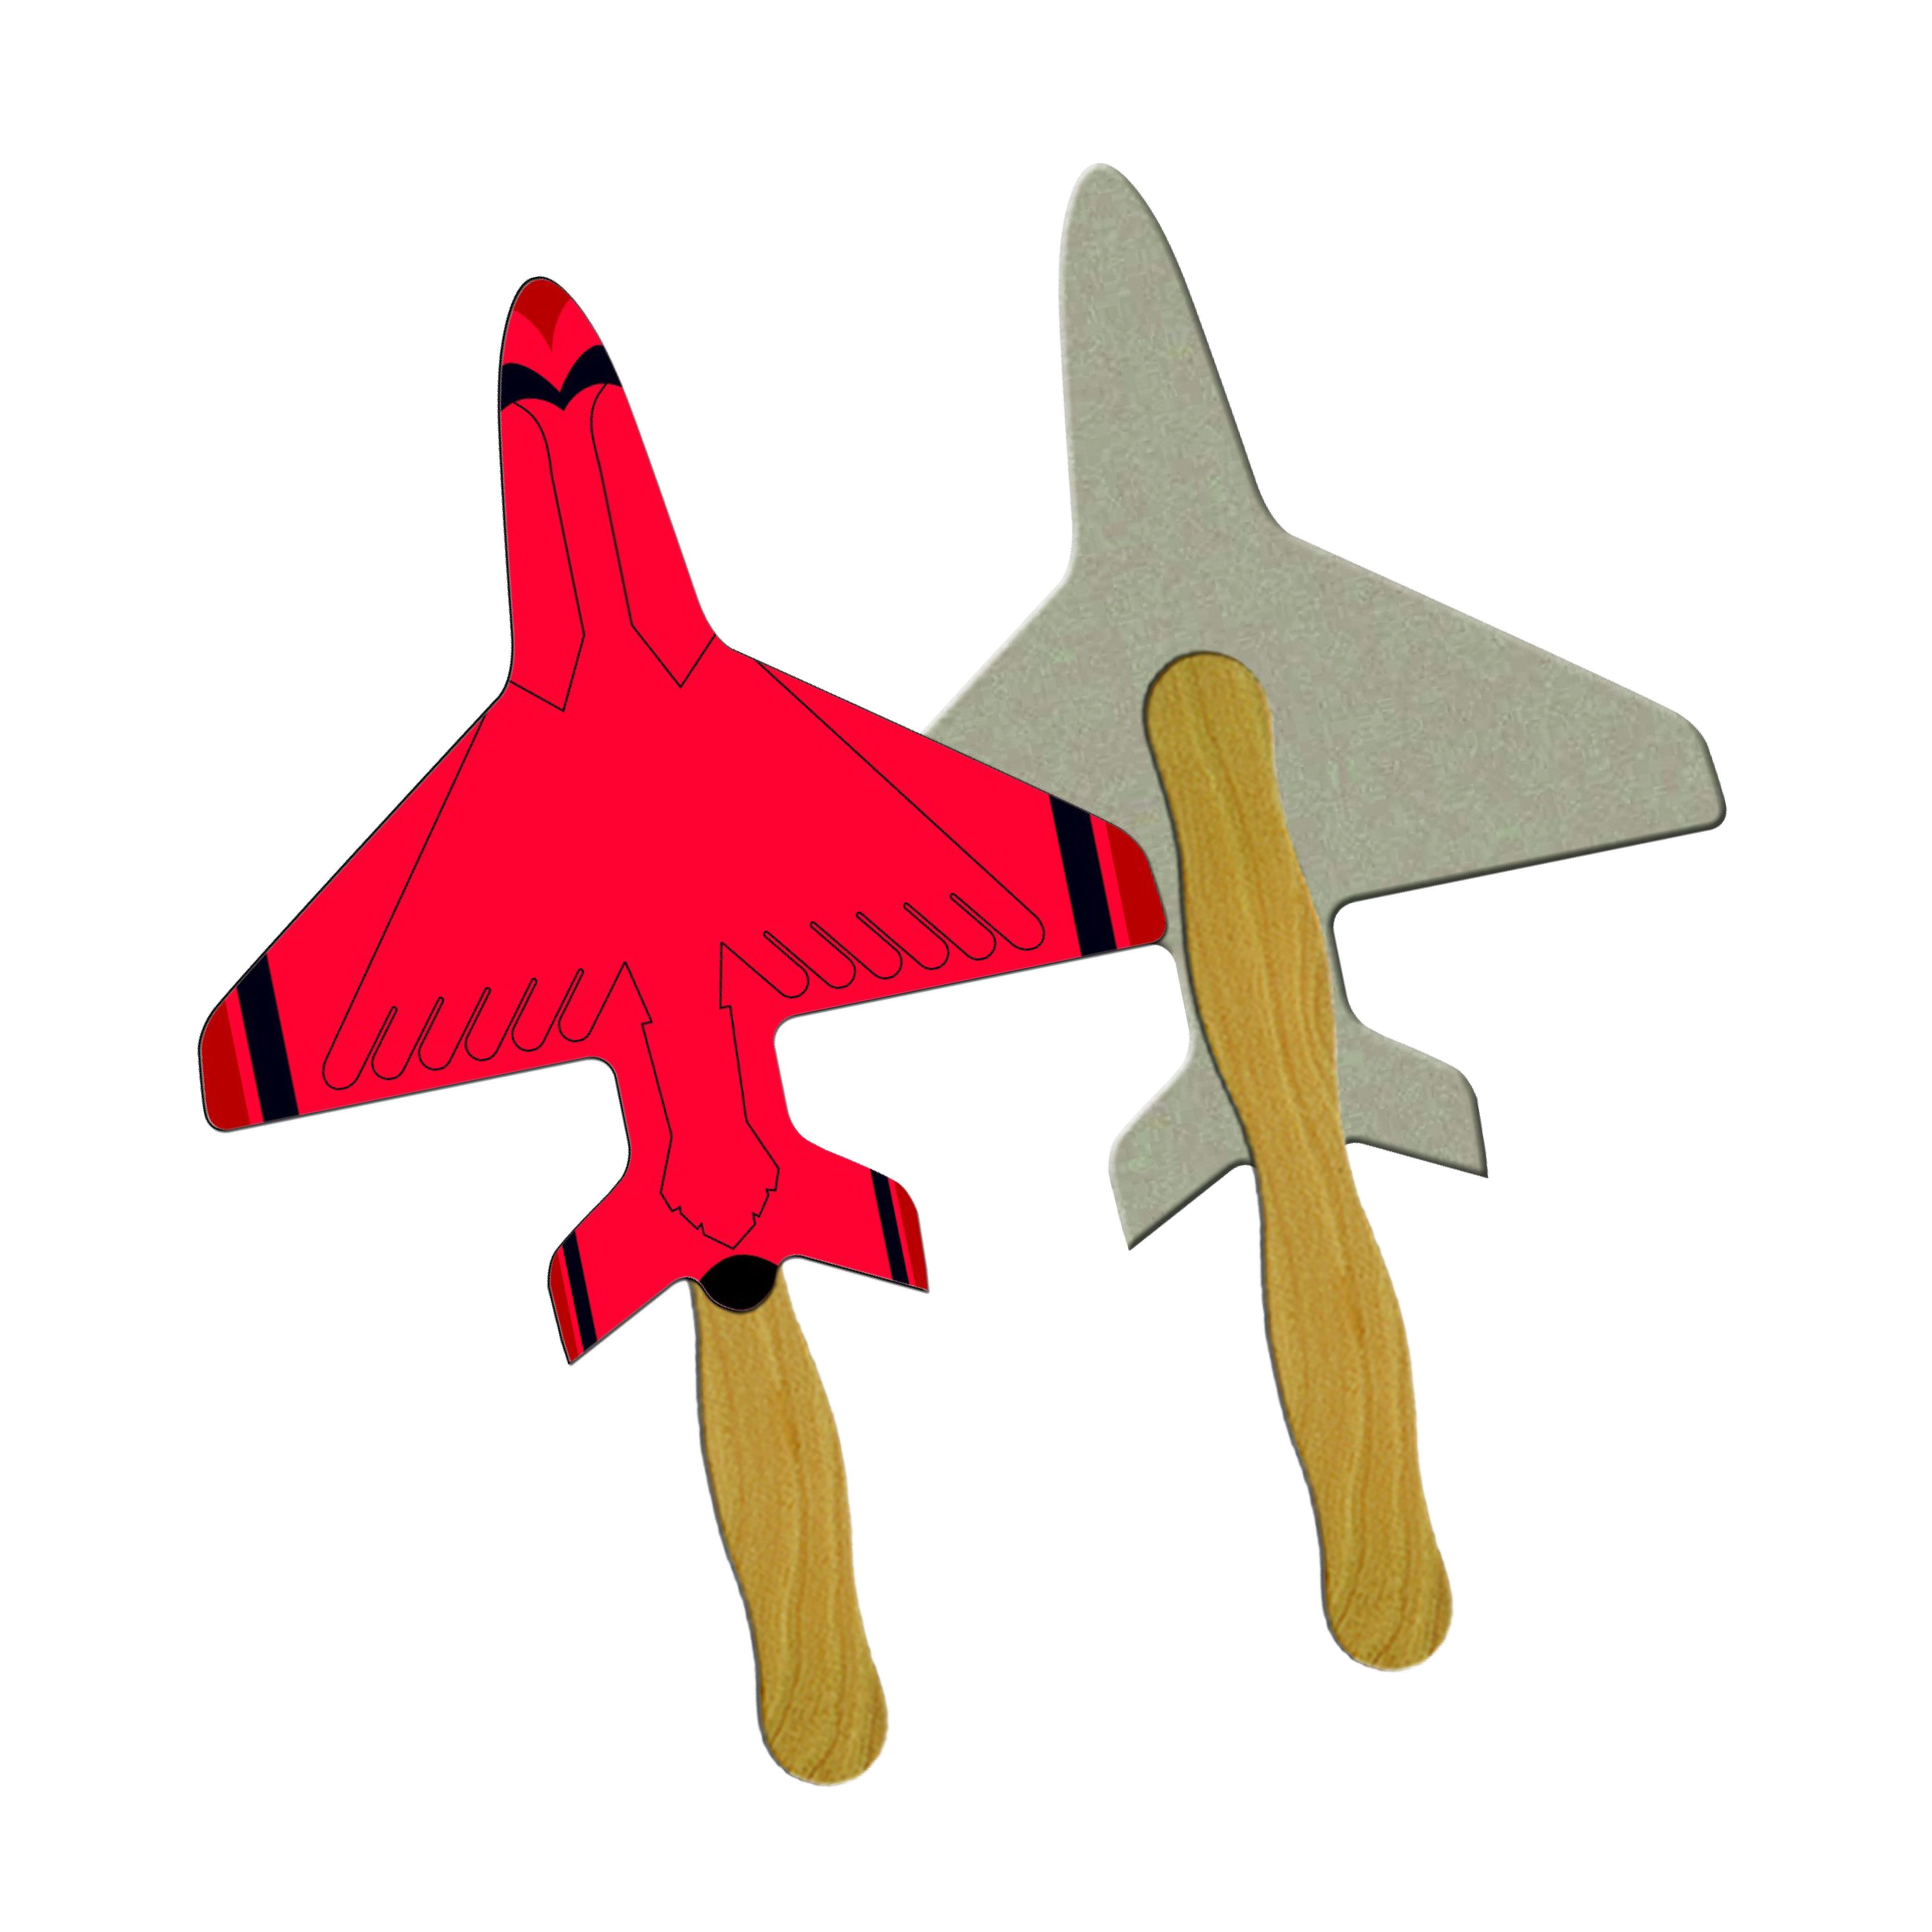 Recycled Hand fan Air Plane Shapes